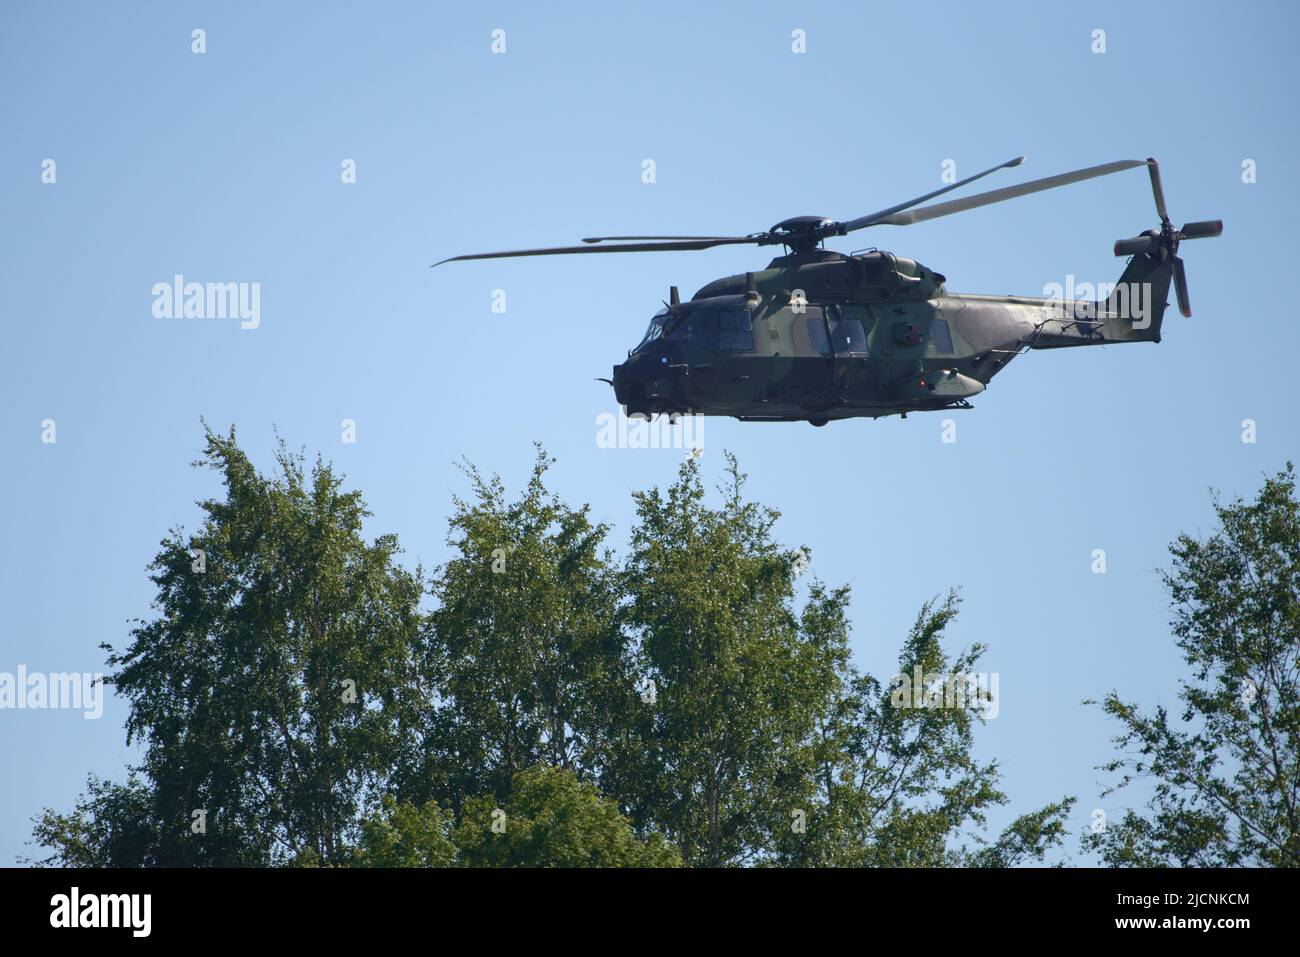 Helsinki, Finland - 9 June 2017: Finnish Army NH90 helicopter at the Kaivopuisto Air Show in Helsinki, Finland on 9 June 2017. Stock Photo